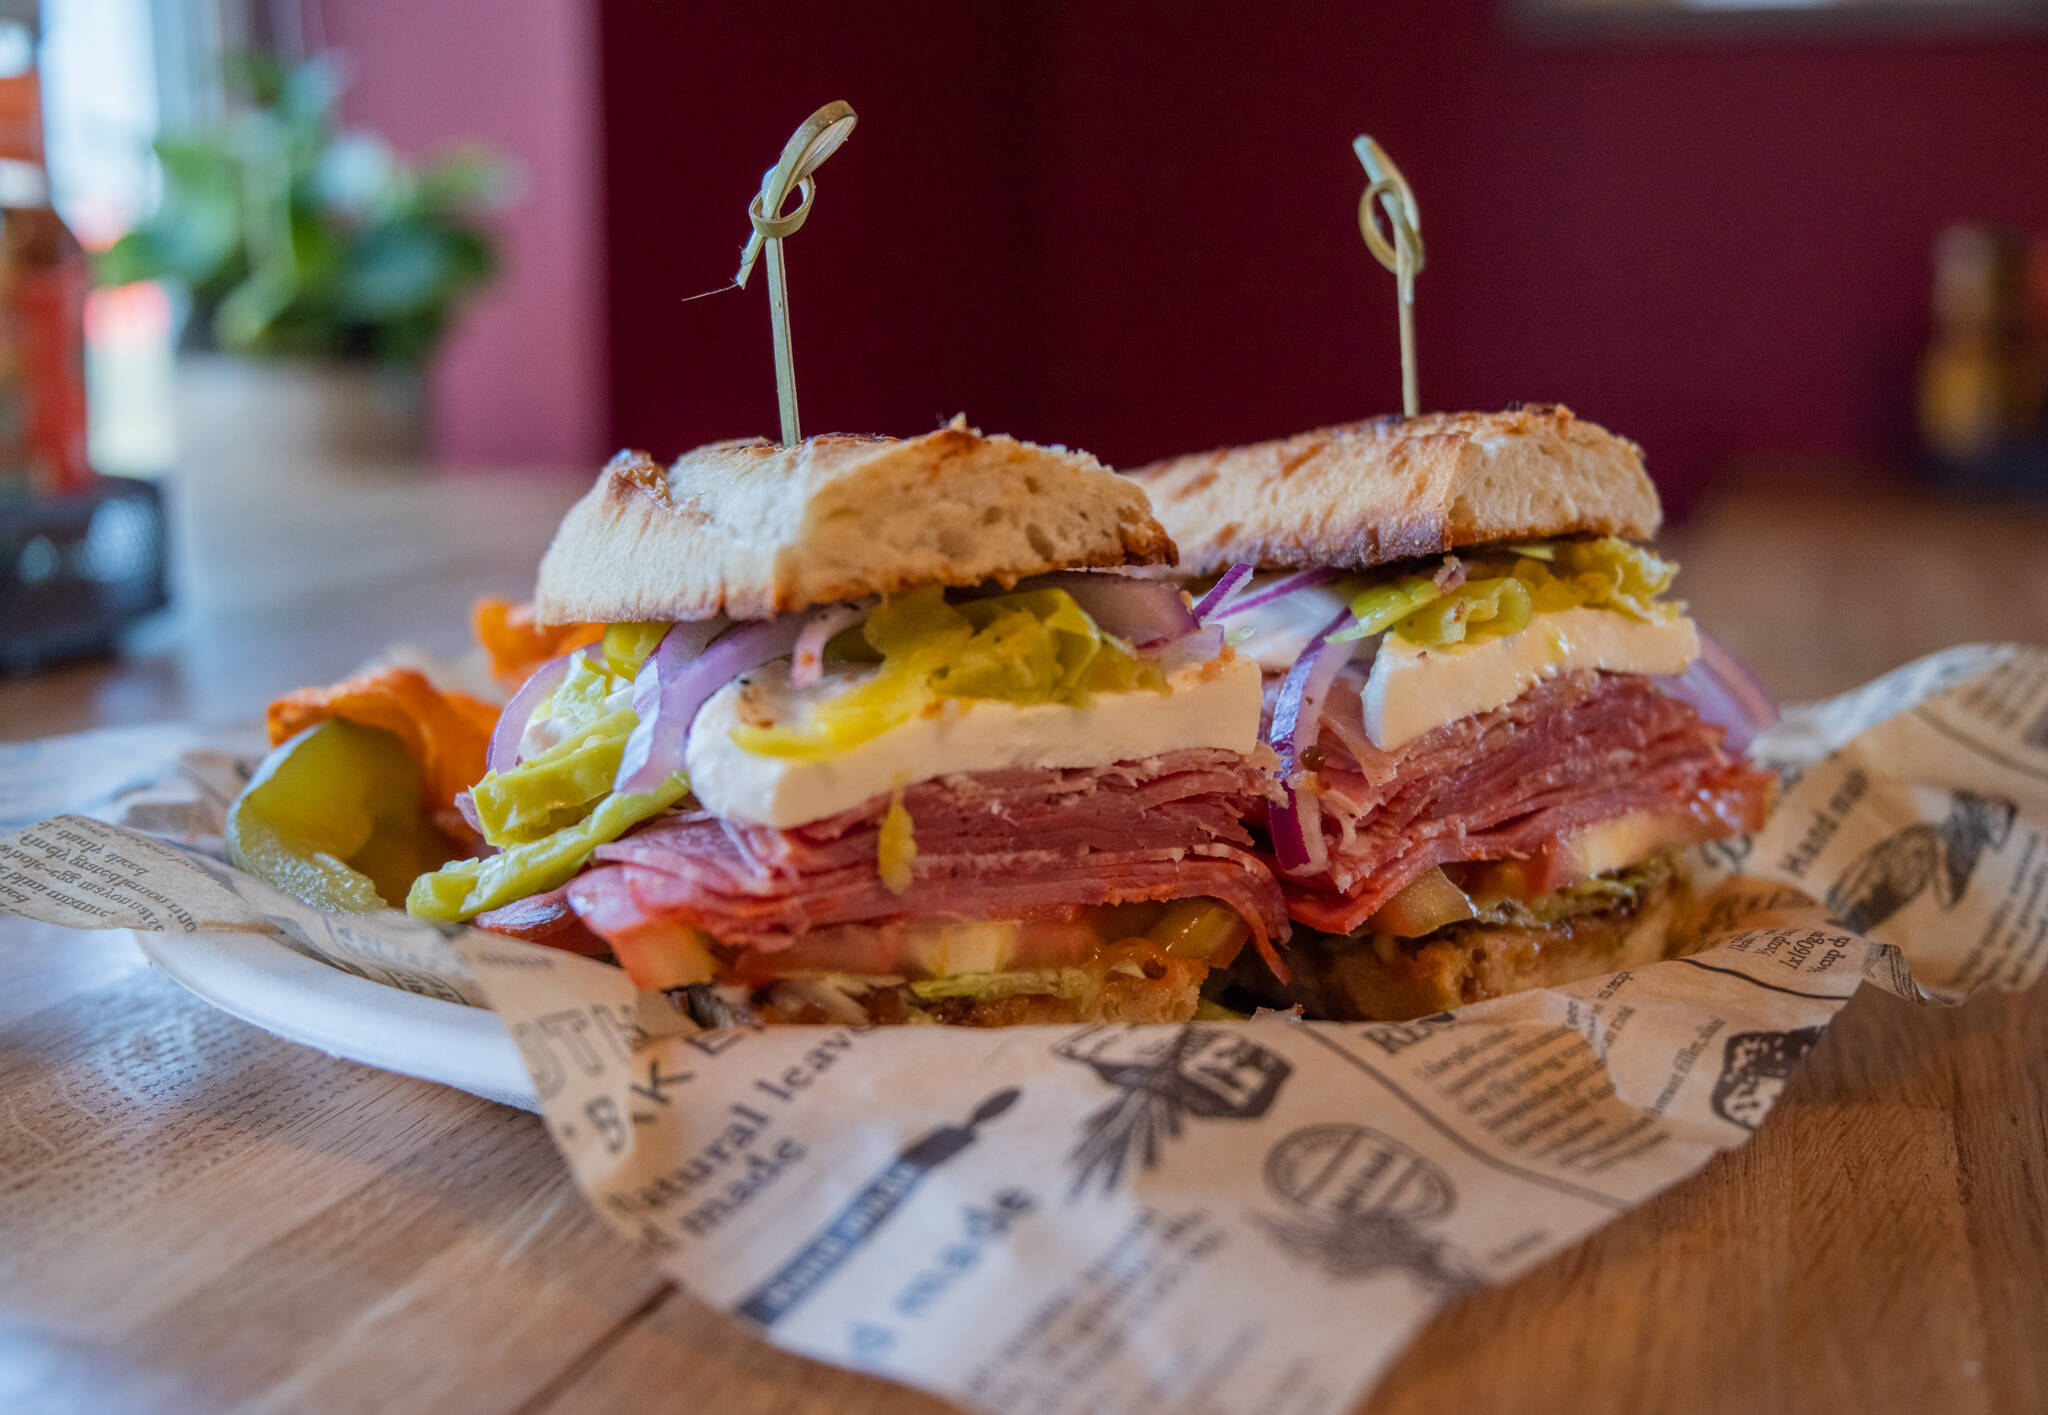 Chef Ted Walker says the customer favorite at The Goat and the Radish is the Italian Hero: capicola, salami, prosciutto, mozzarella, lettuce, tomato, pepperoncinis and red onion with oil and vinegar on an Italian roll.